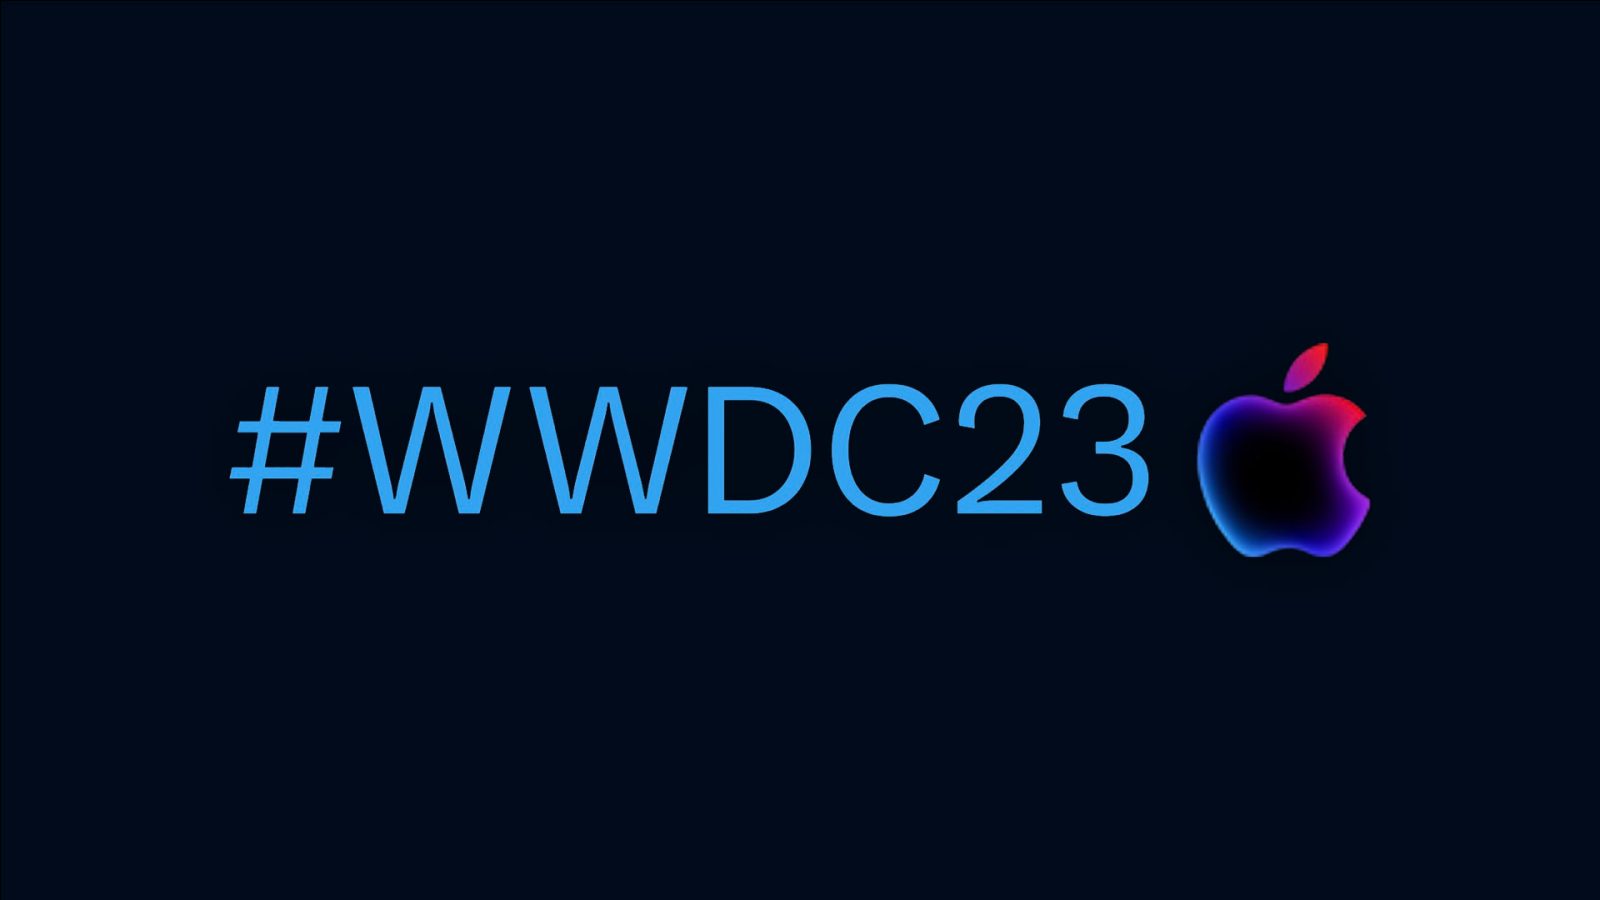 WWDC23 hashflag is live on Twitter; developers can now join Activities on Slack